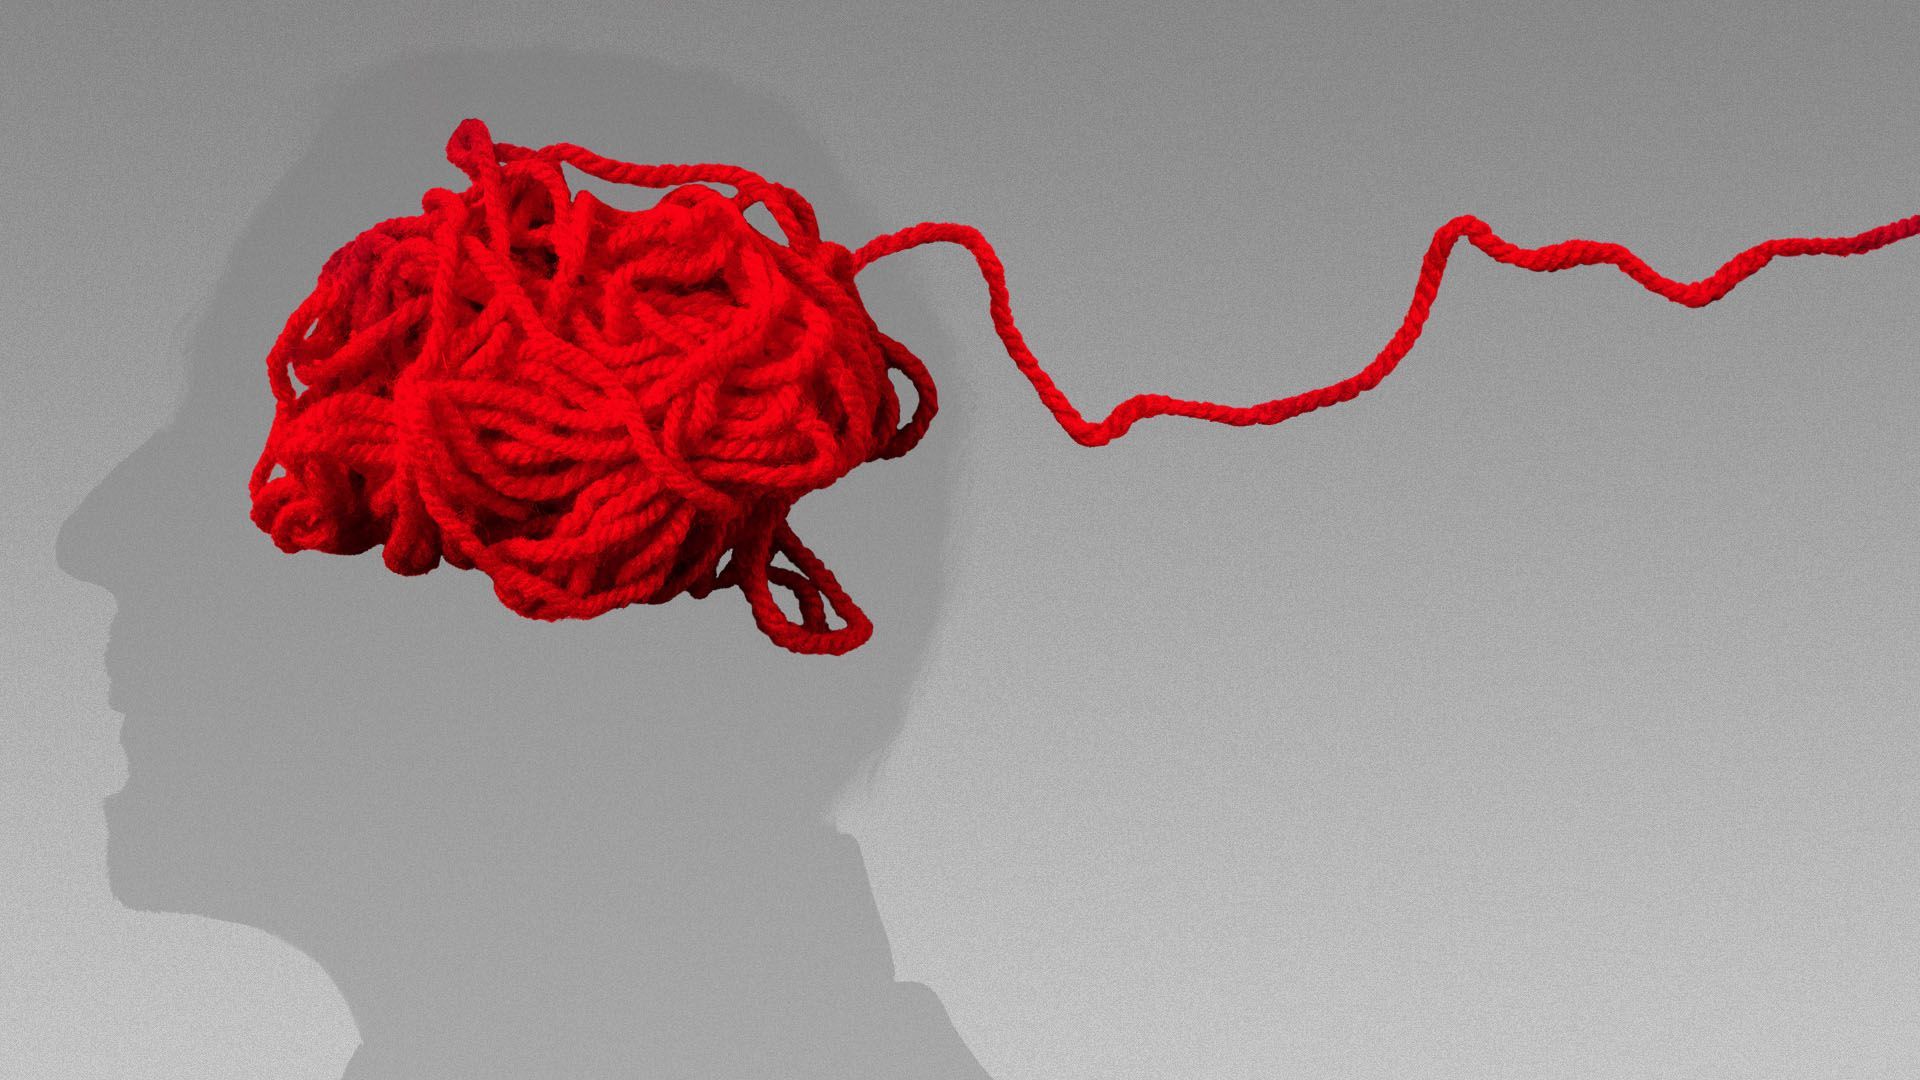 Illustration of an unraveling yarn in the shape of a brain against a man in silhouette 